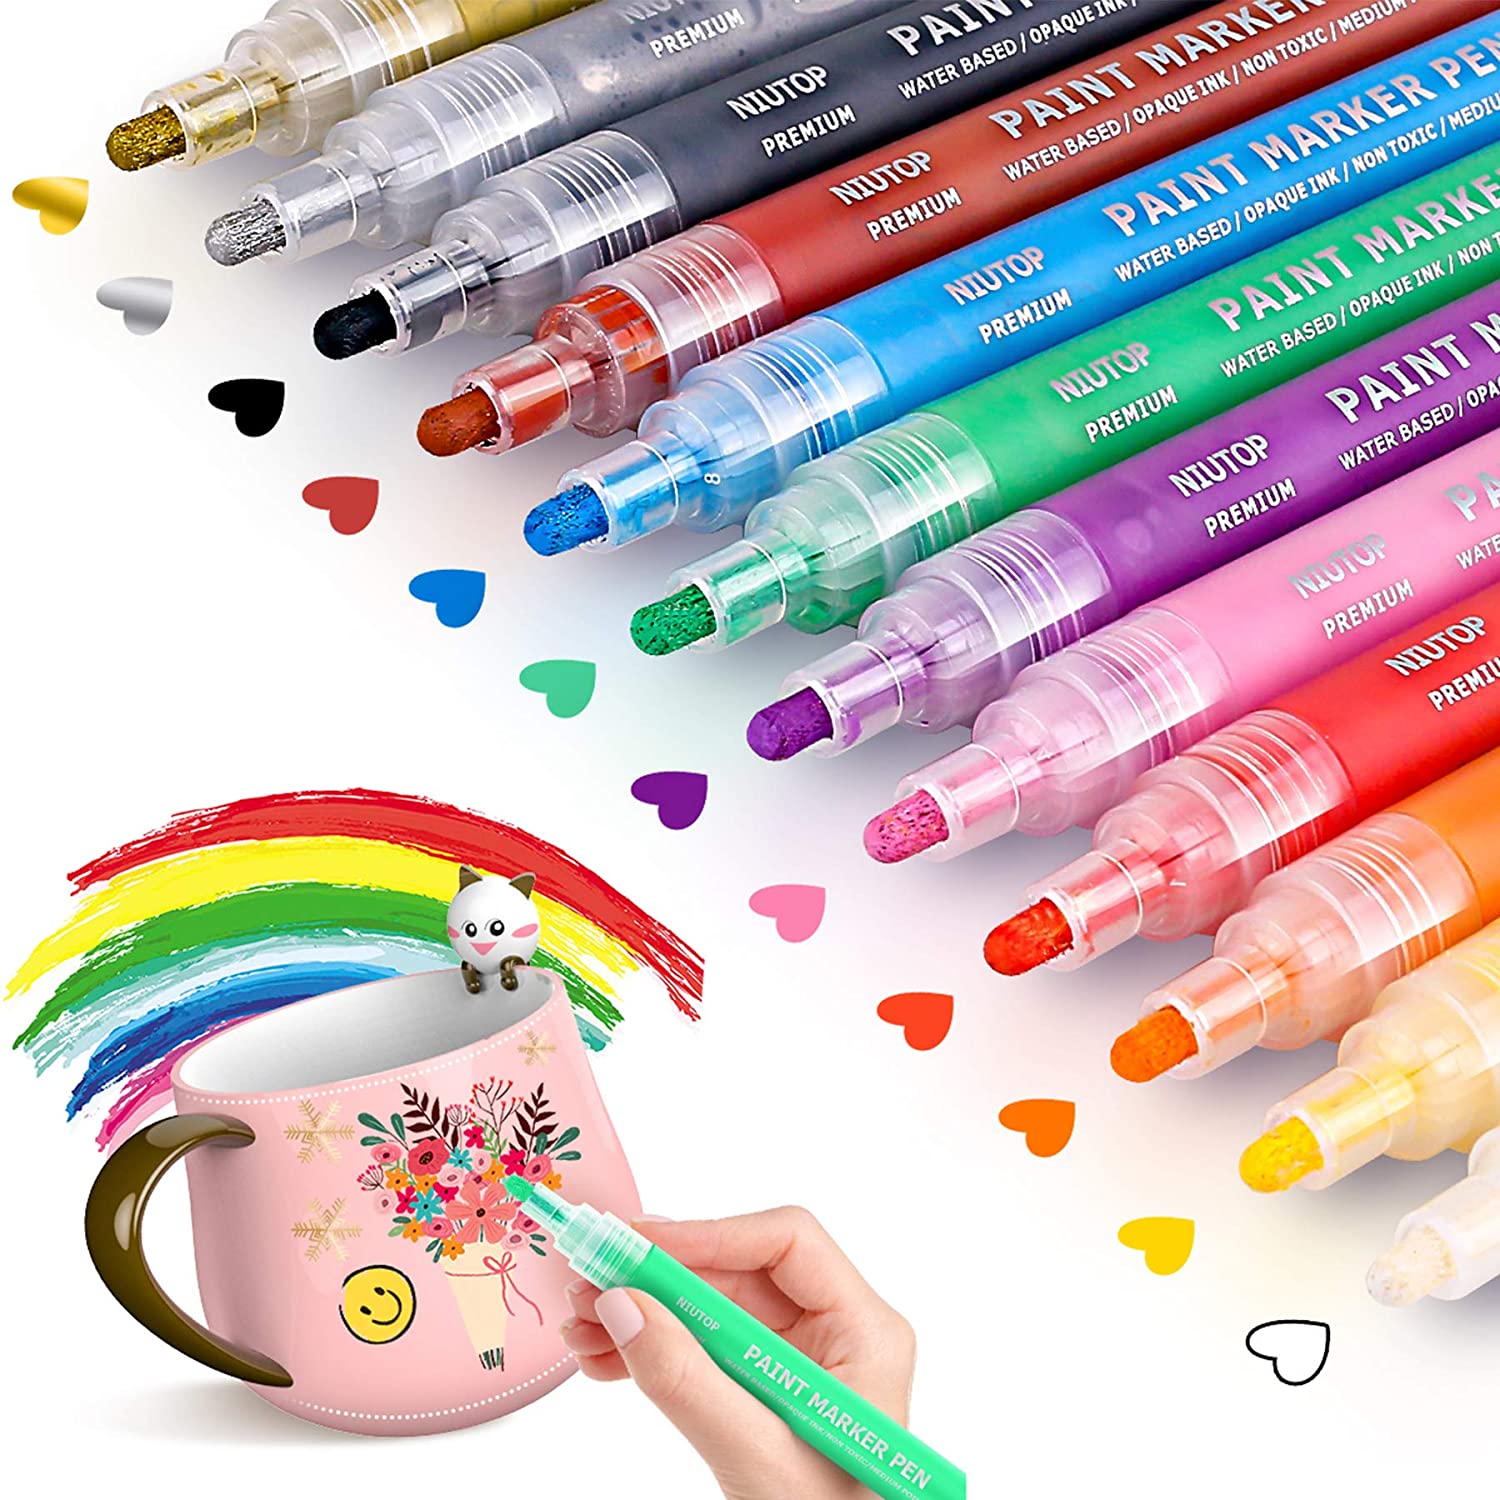 Acrylic Paint Pens for Rock Painting, Set of 18 PCS Paint Markers Kit for  Glass, Stone, Wood, Fabric, Metal, Ceramic, Rock, Water Based, Quick-Dry,  Great Gift for Kids Teens Adults Beginner